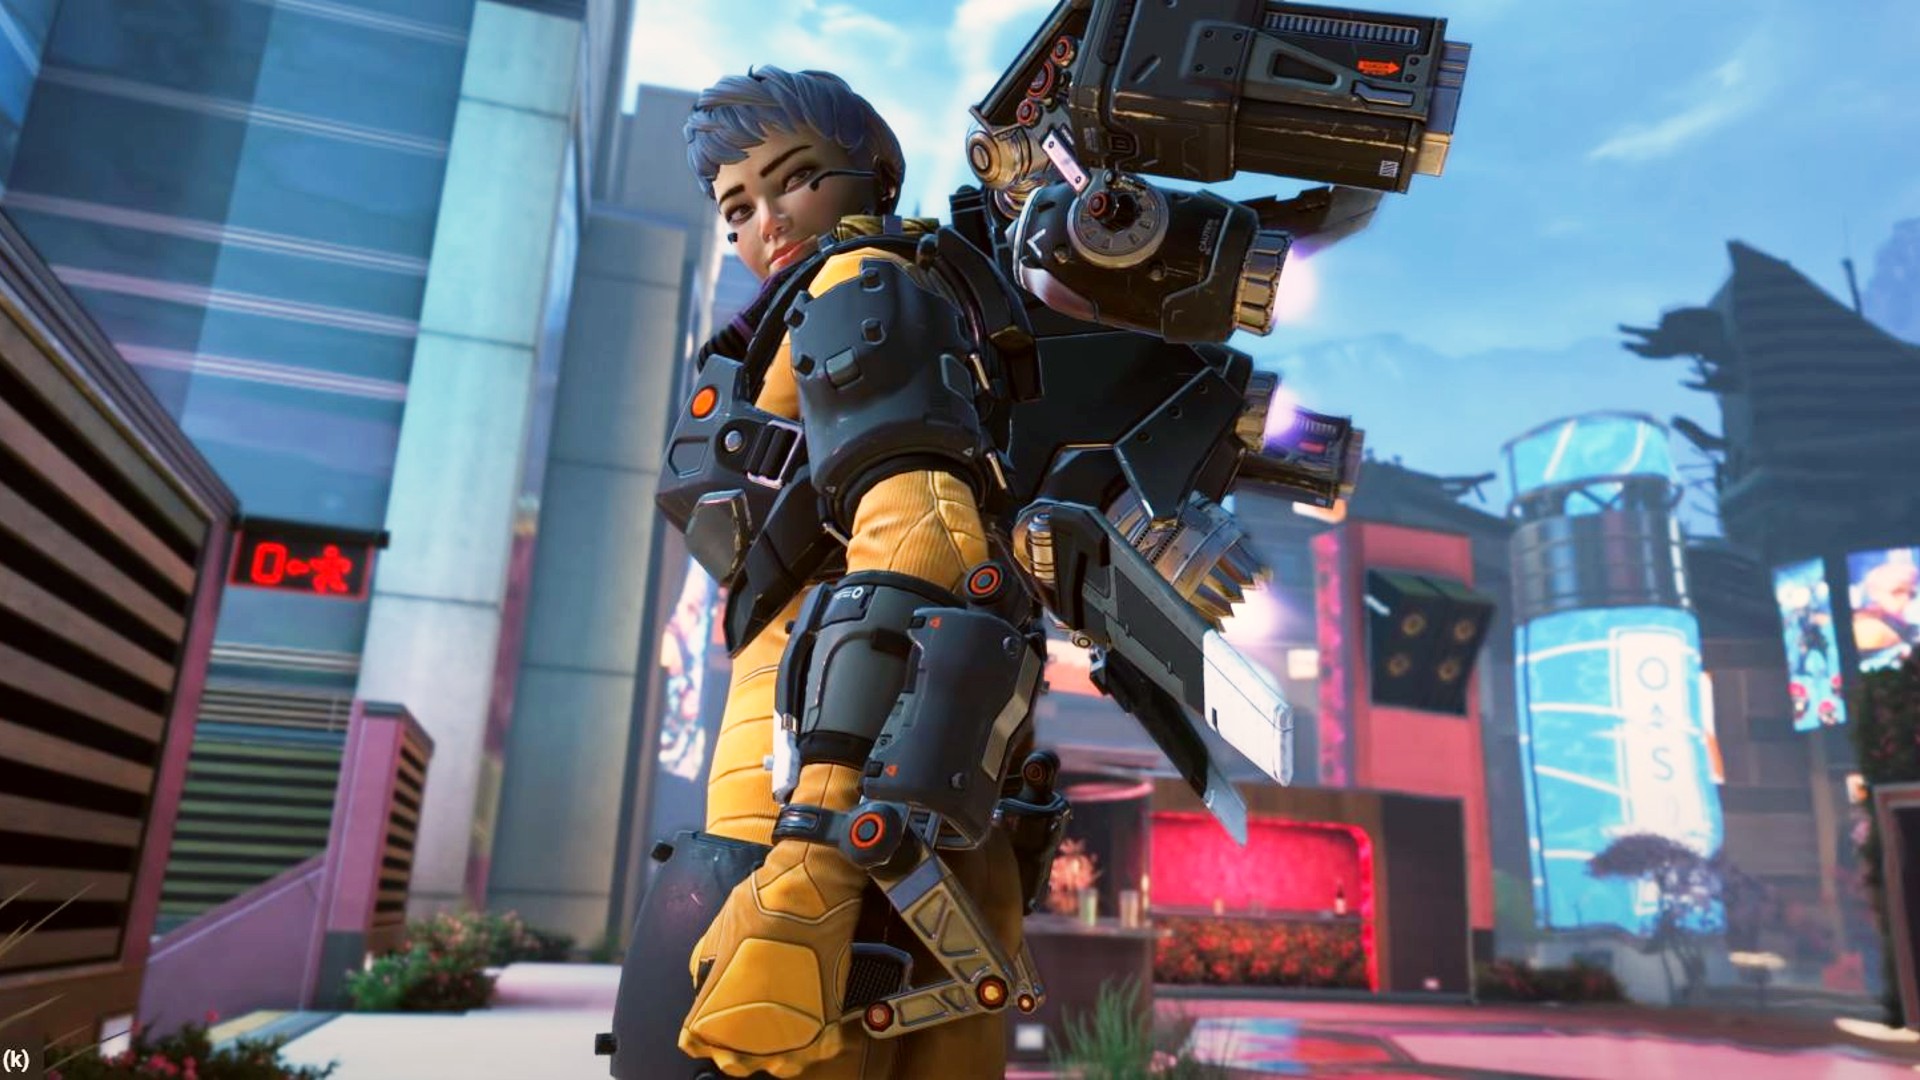 Valkyrie soars to top of Apex Legends pick rate charts after ALGS